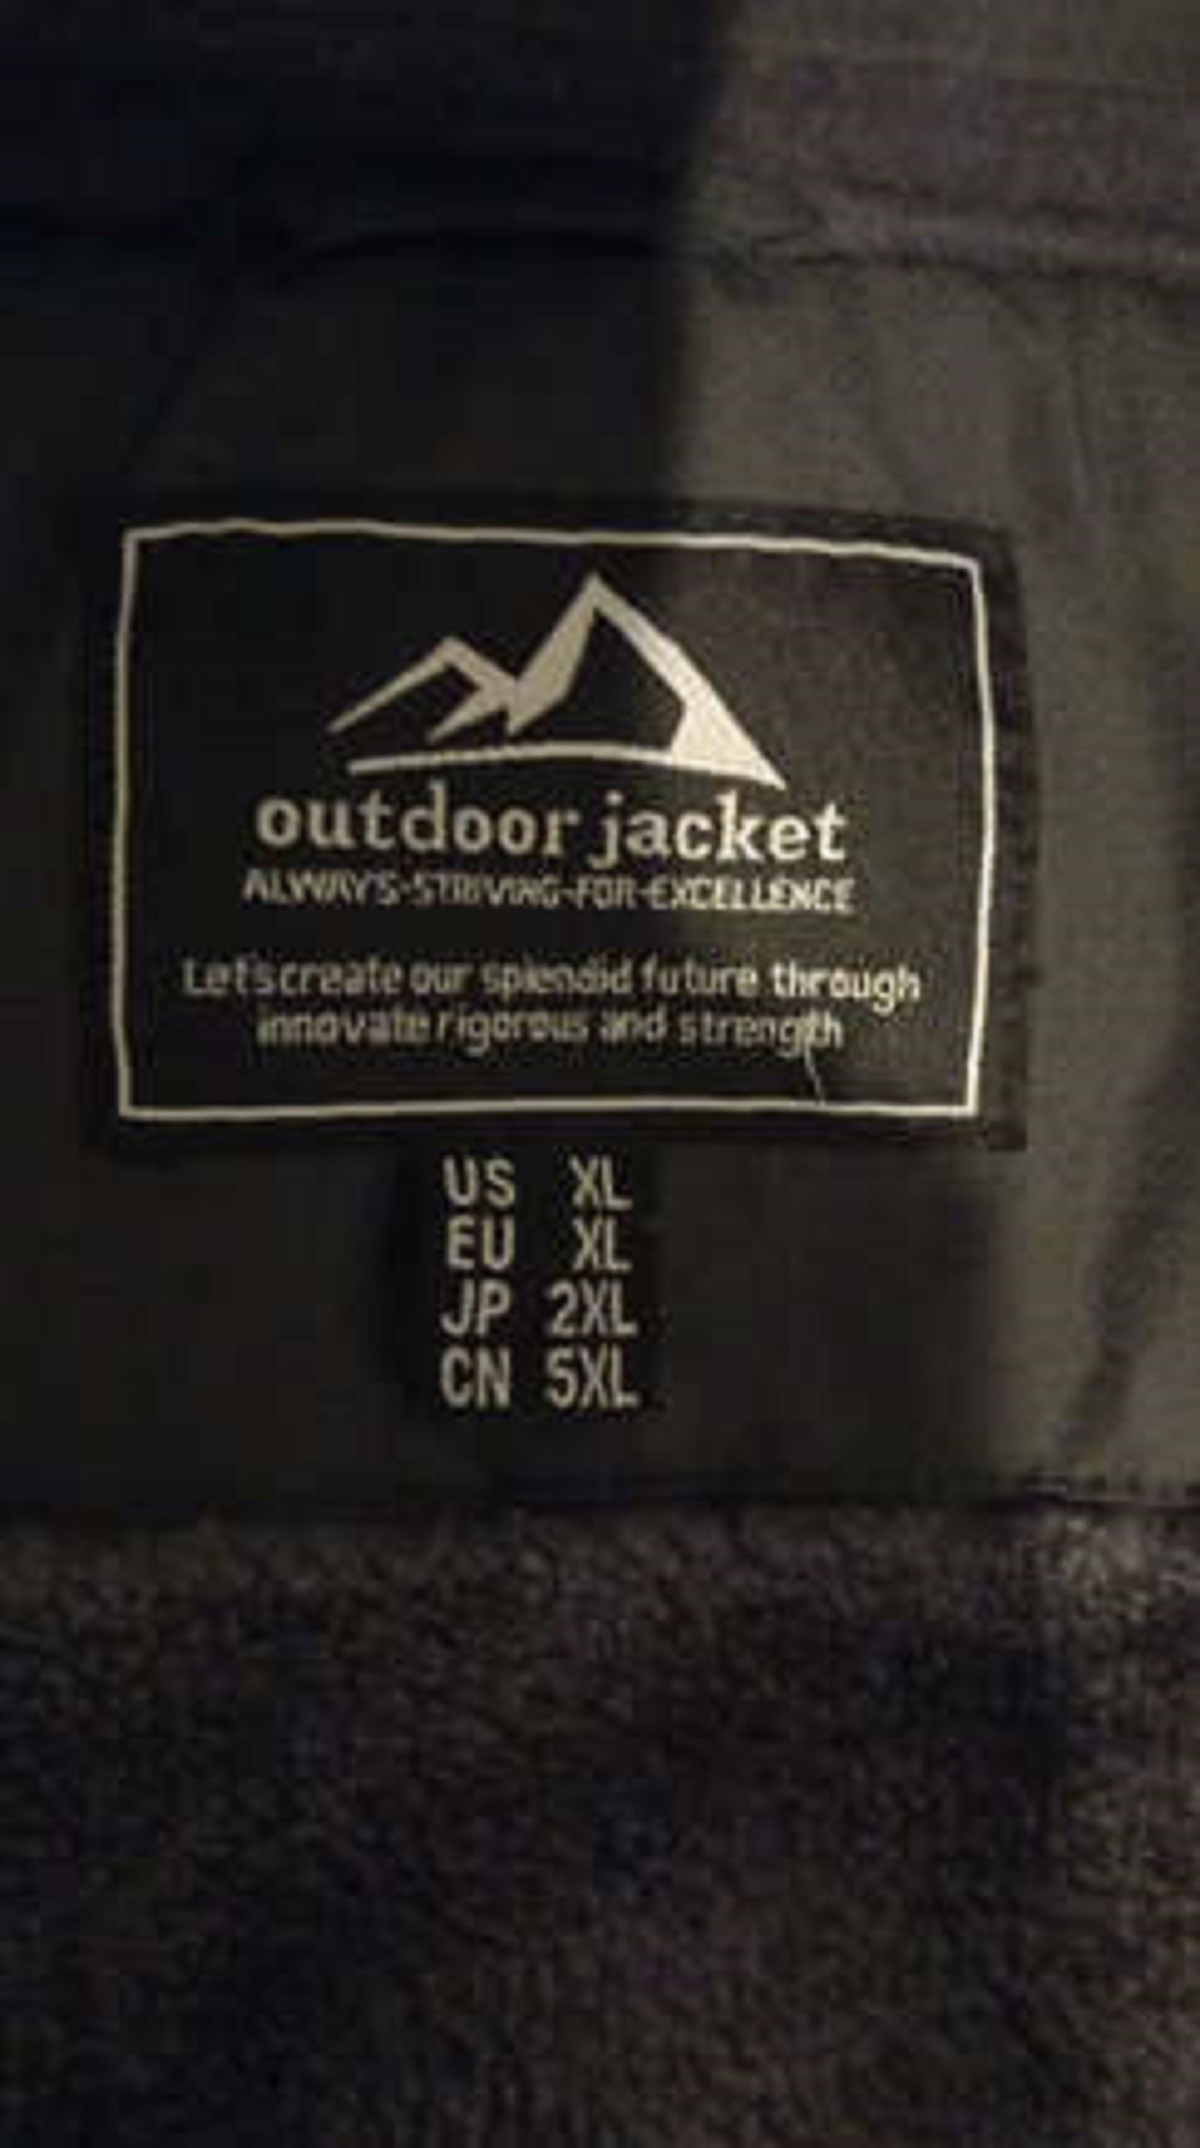 You lived in a smaller country? Size difference between countries for a jacket.